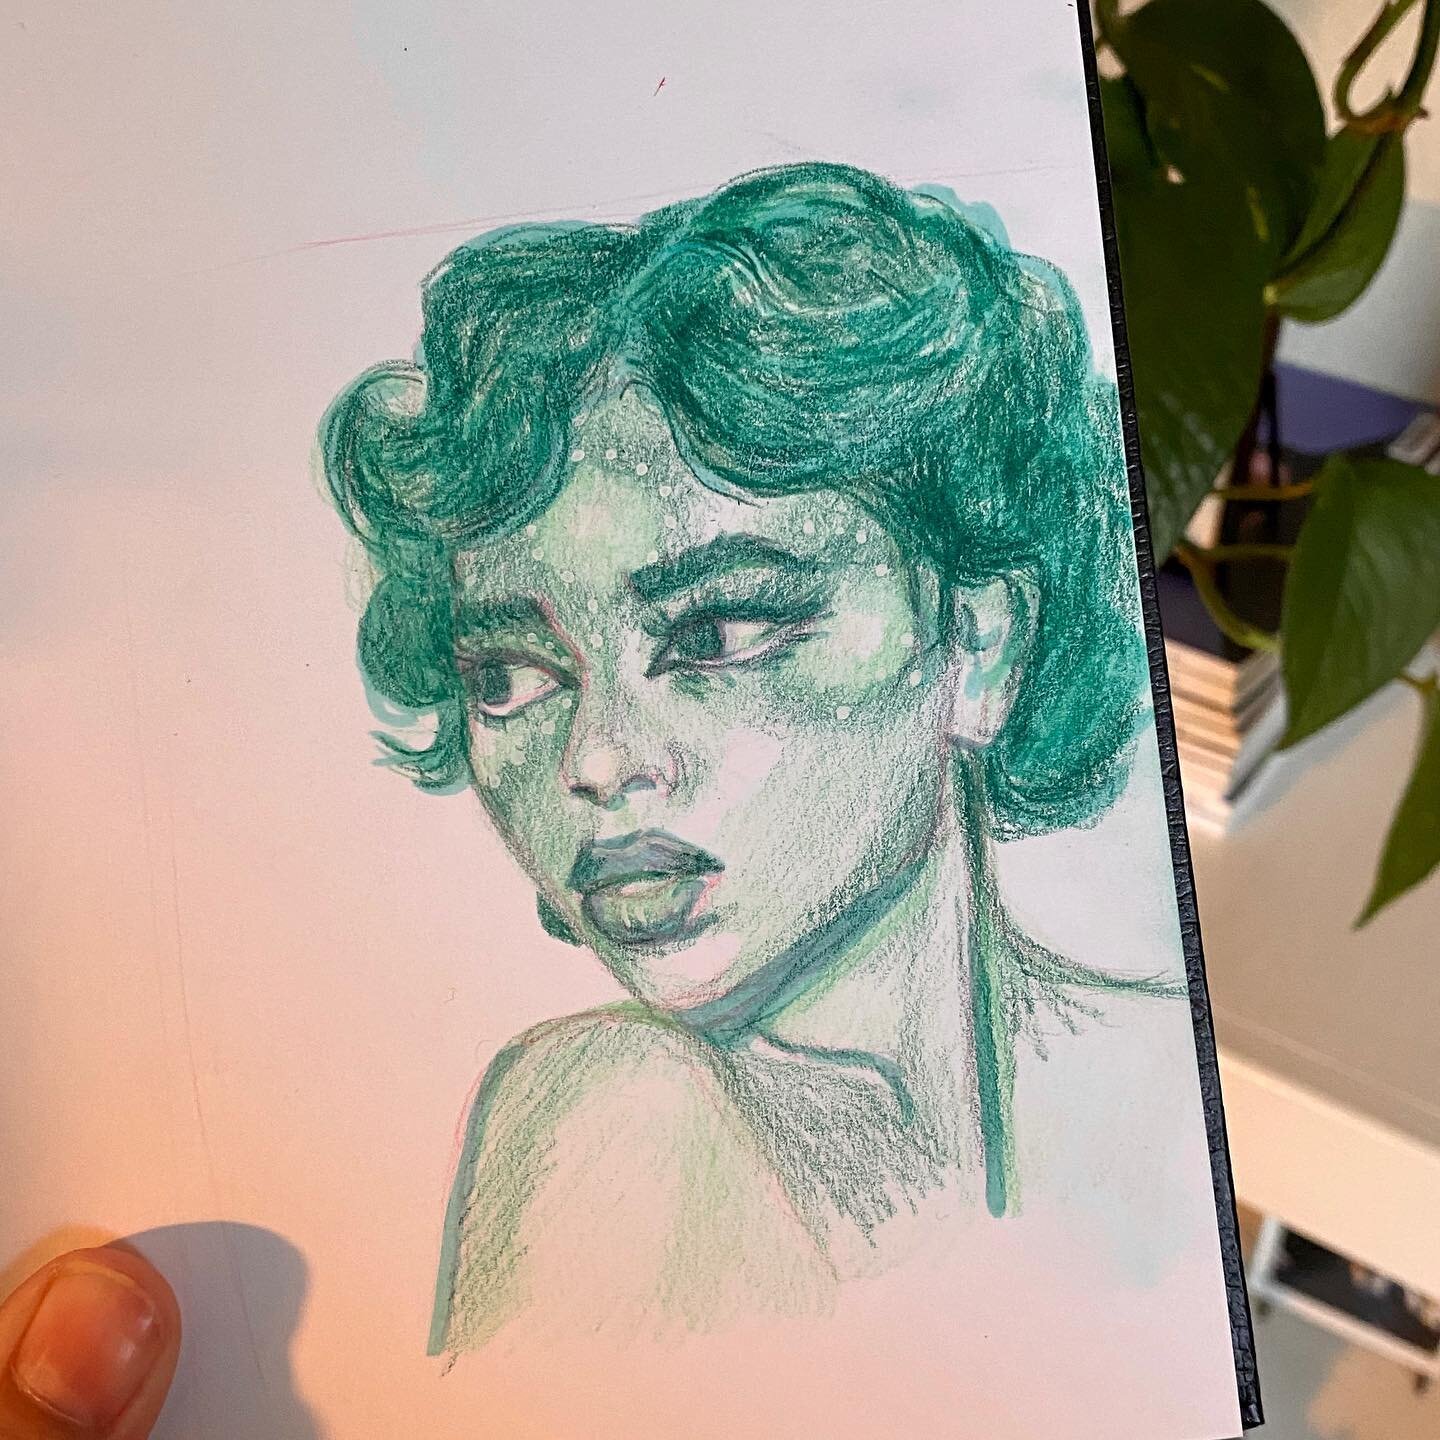 24/365 gotta catch up on a few days here! I really like how this green girl turned out! Reference in my bio 💚

#365daysofart #dailydrawing #coloredpencilart #portraitart #the100dayproject @dothe100dayproject #draw365